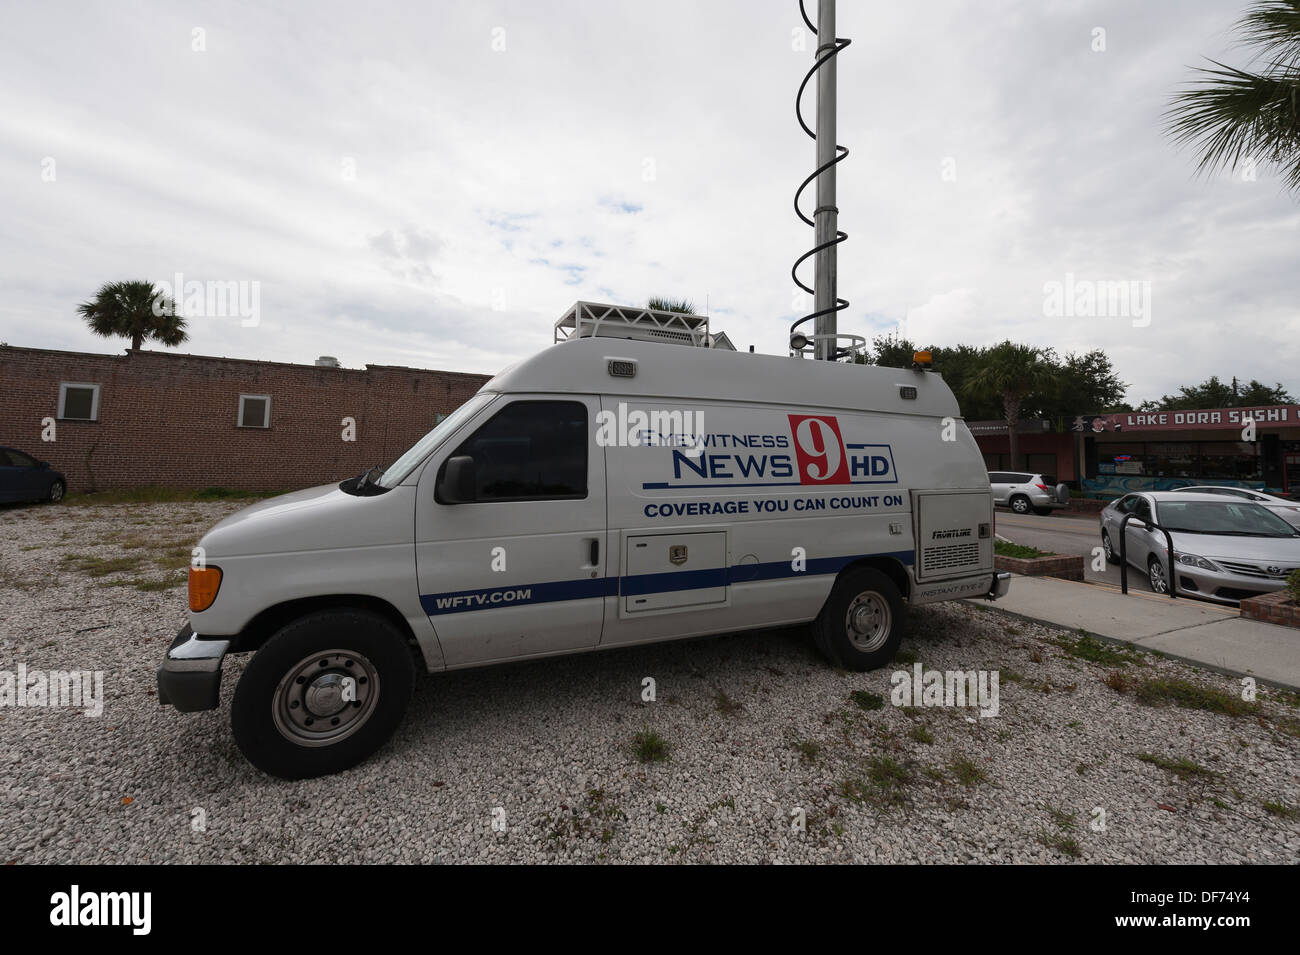 EyeWitness News WFTV  9 HD Coverage Van setup at an event in the City of Tavares, Florida USA Stock Photo